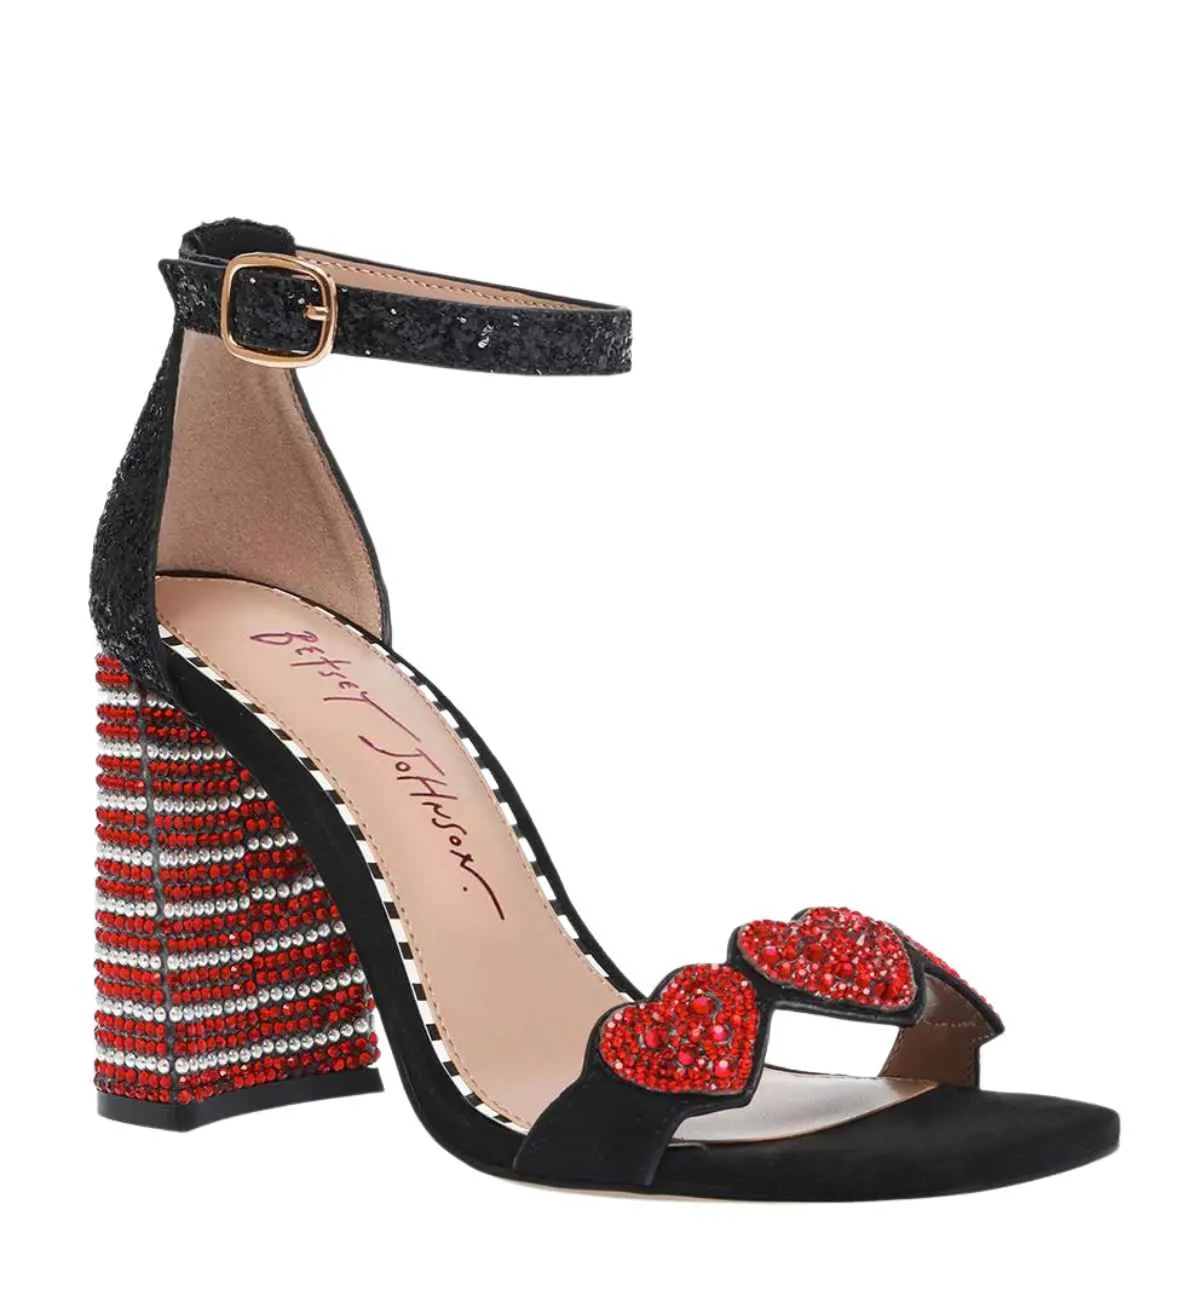 Sparkly black heart heel with red and white gem embellishments on heel and band on white background.